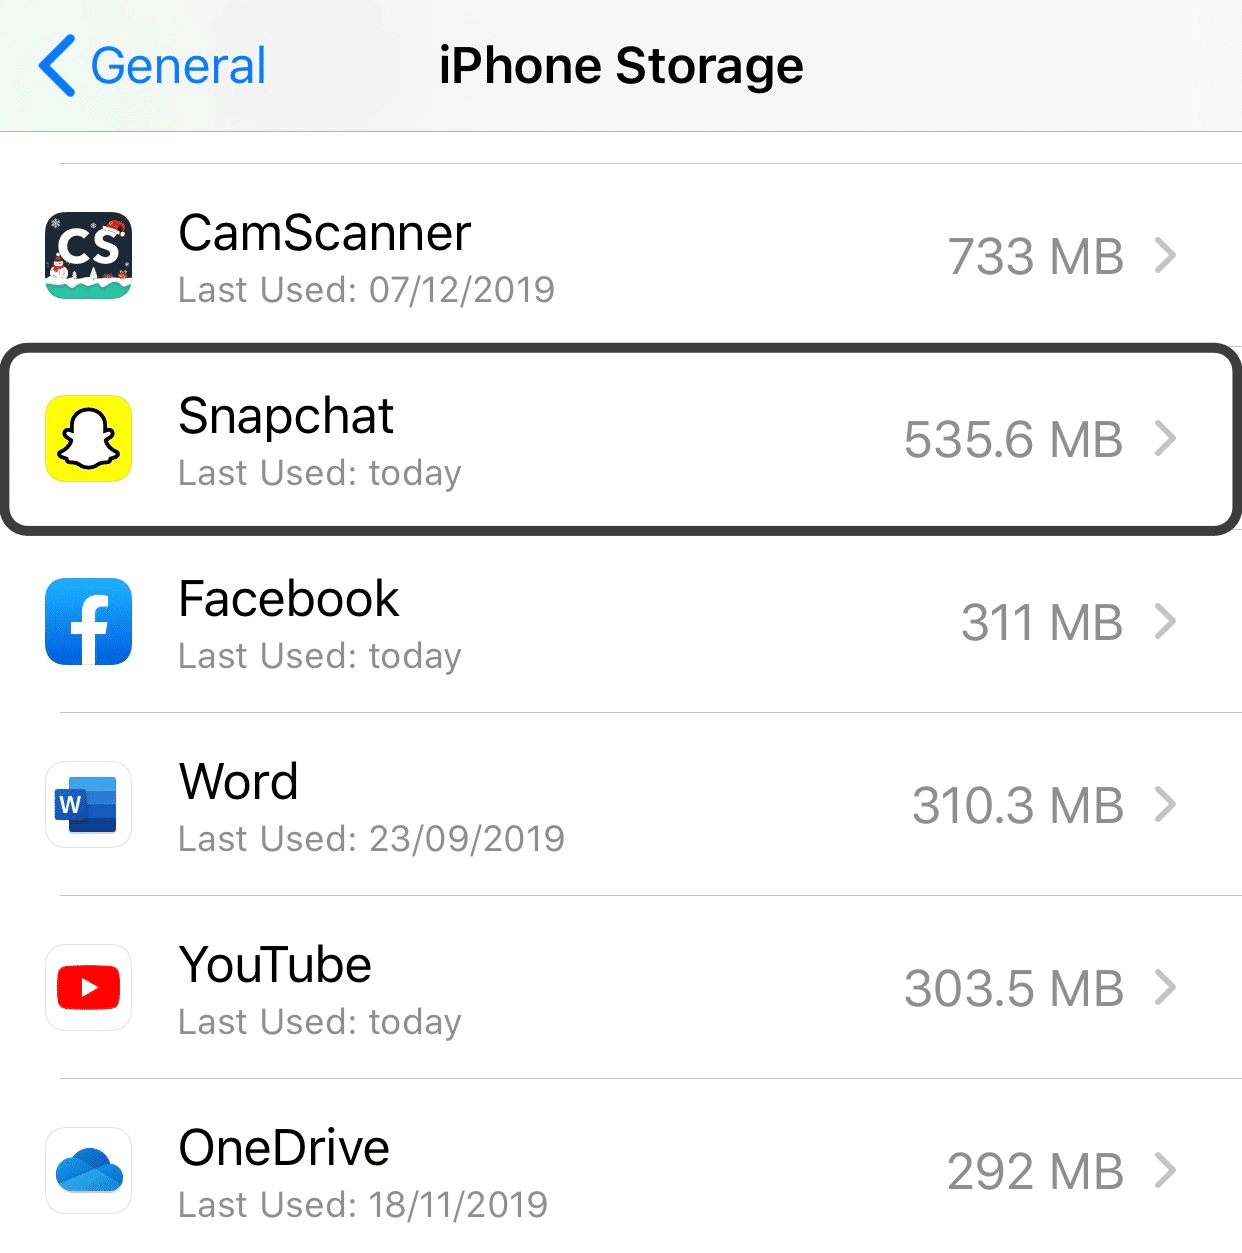 Reinstalling Snapchat app to clear snapchat cache